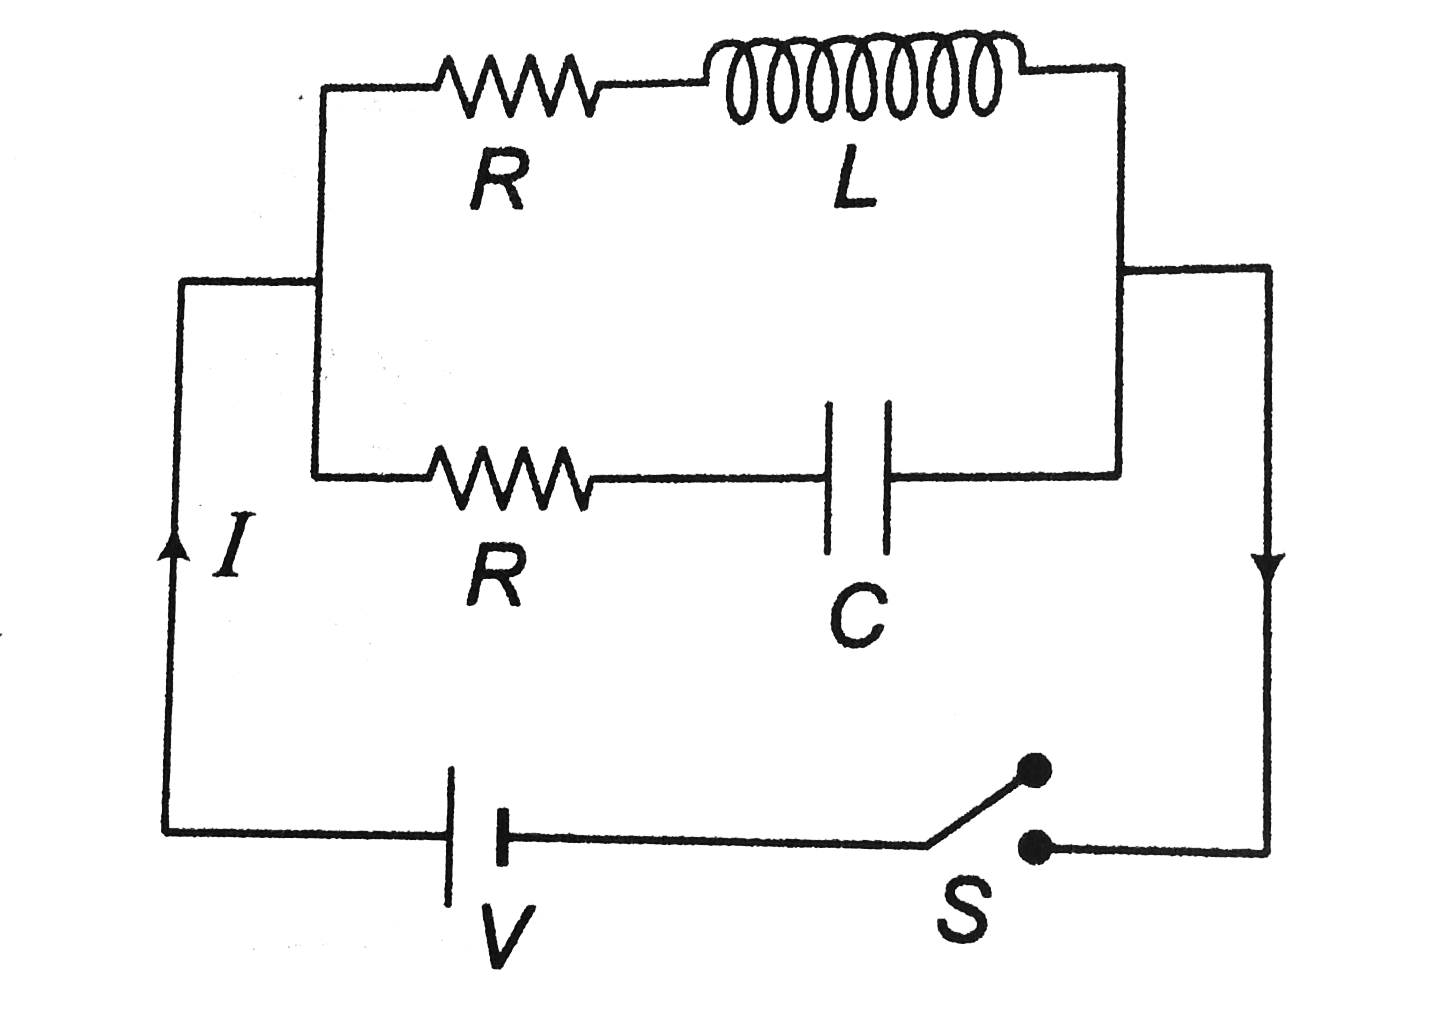 In the circuit diagram shown, initially there is no energy in the inductor and the capacitor, The switch is closed at t = 0. Find the current I as a function of time if R=sqrt(L//C)